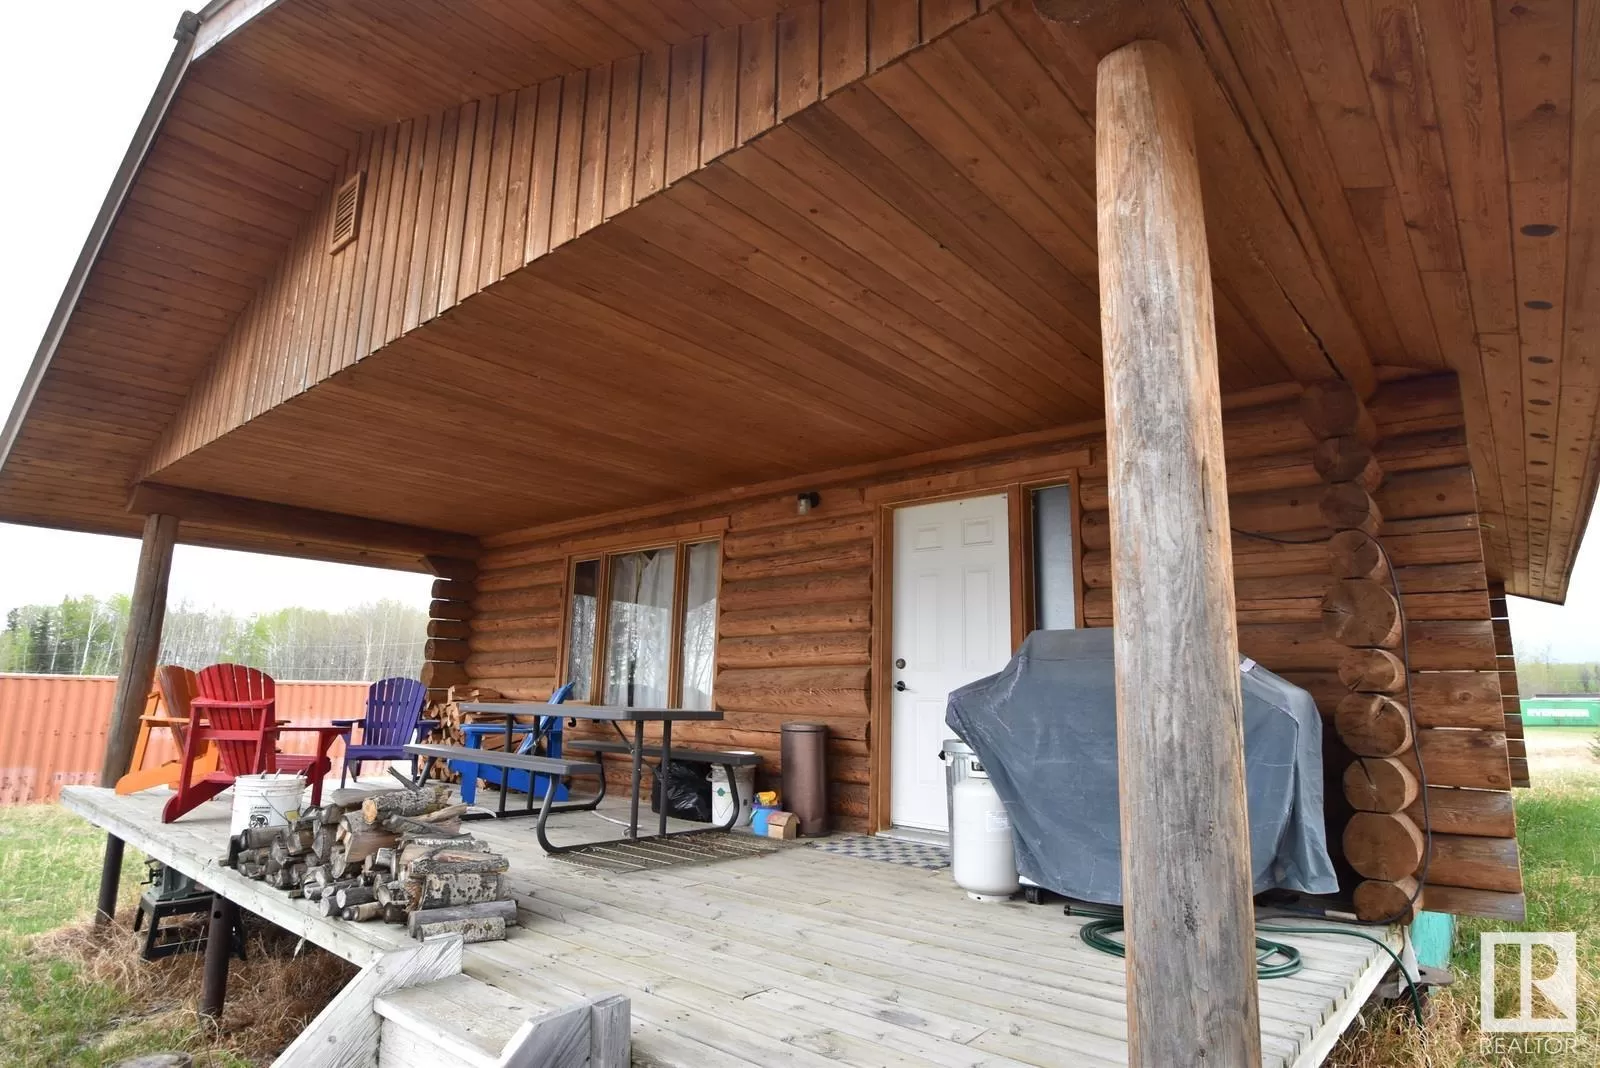 House for rent: 9 Tee Pee Dr, Tee Pee Lake Est, Rural Athabasca County, Alberta T0A 0M0